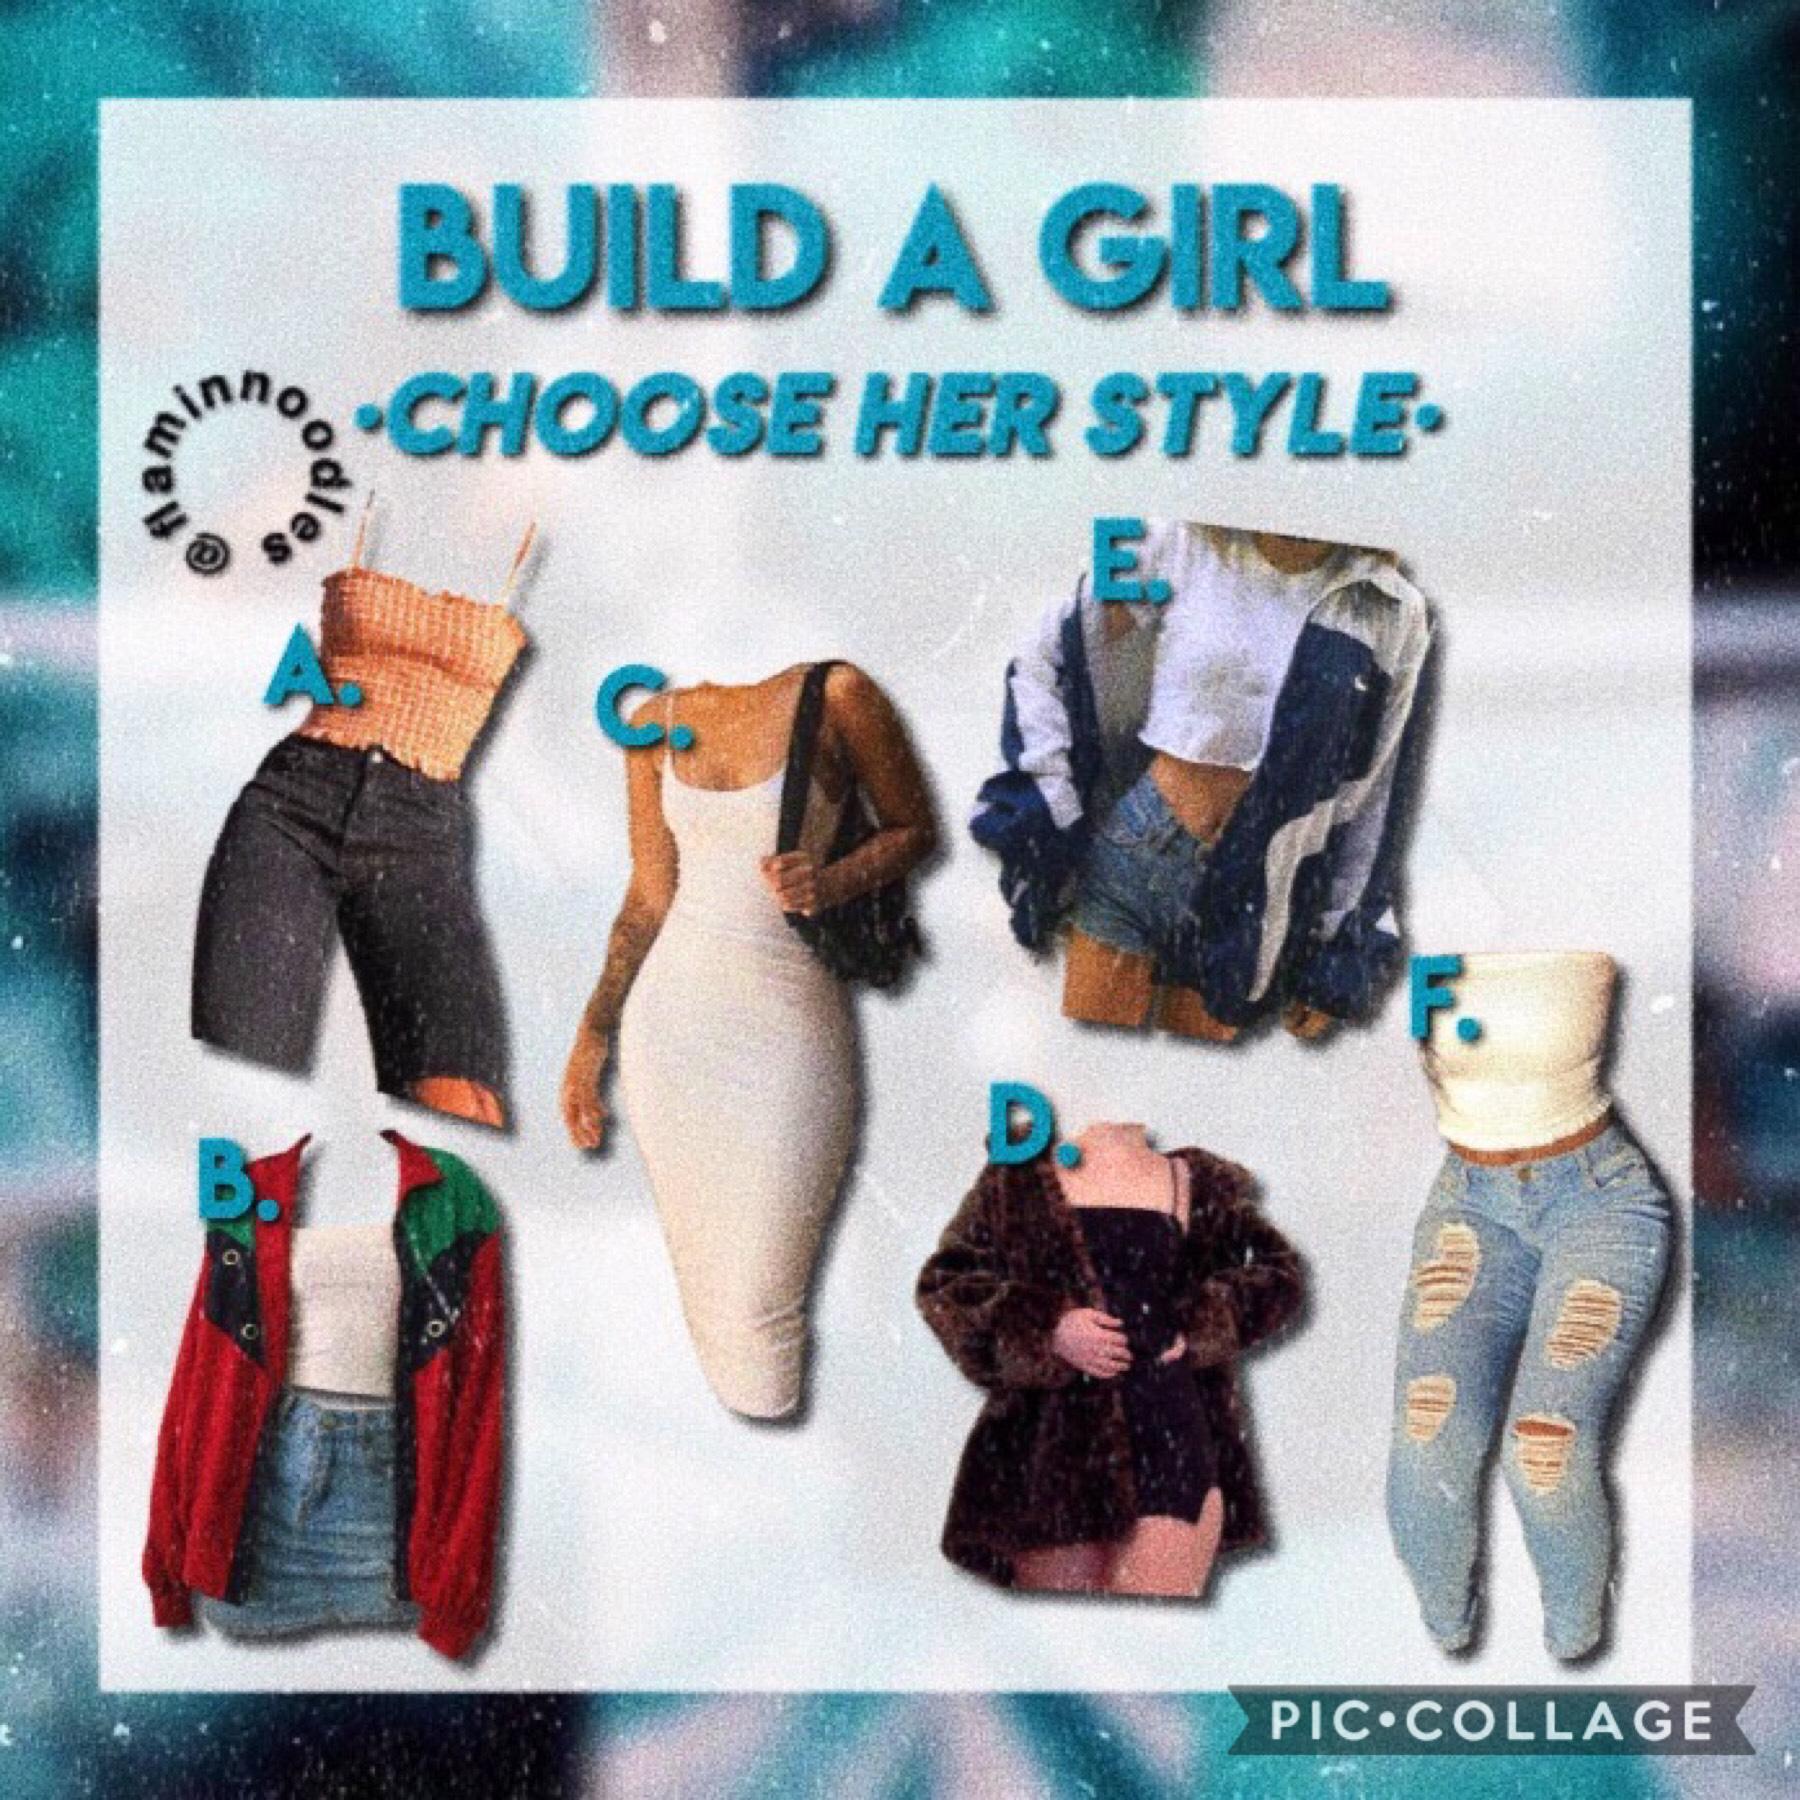 ✨ Tap ✨
Hey this is part 2 of Build A Girl I did part 1 a while ago!
I know I’m posting later than I usually do but hey it’s still Tuesday tho 😂 also I just got finished watching BrightBurn it was good!
Qotd: which outfit would u choose?